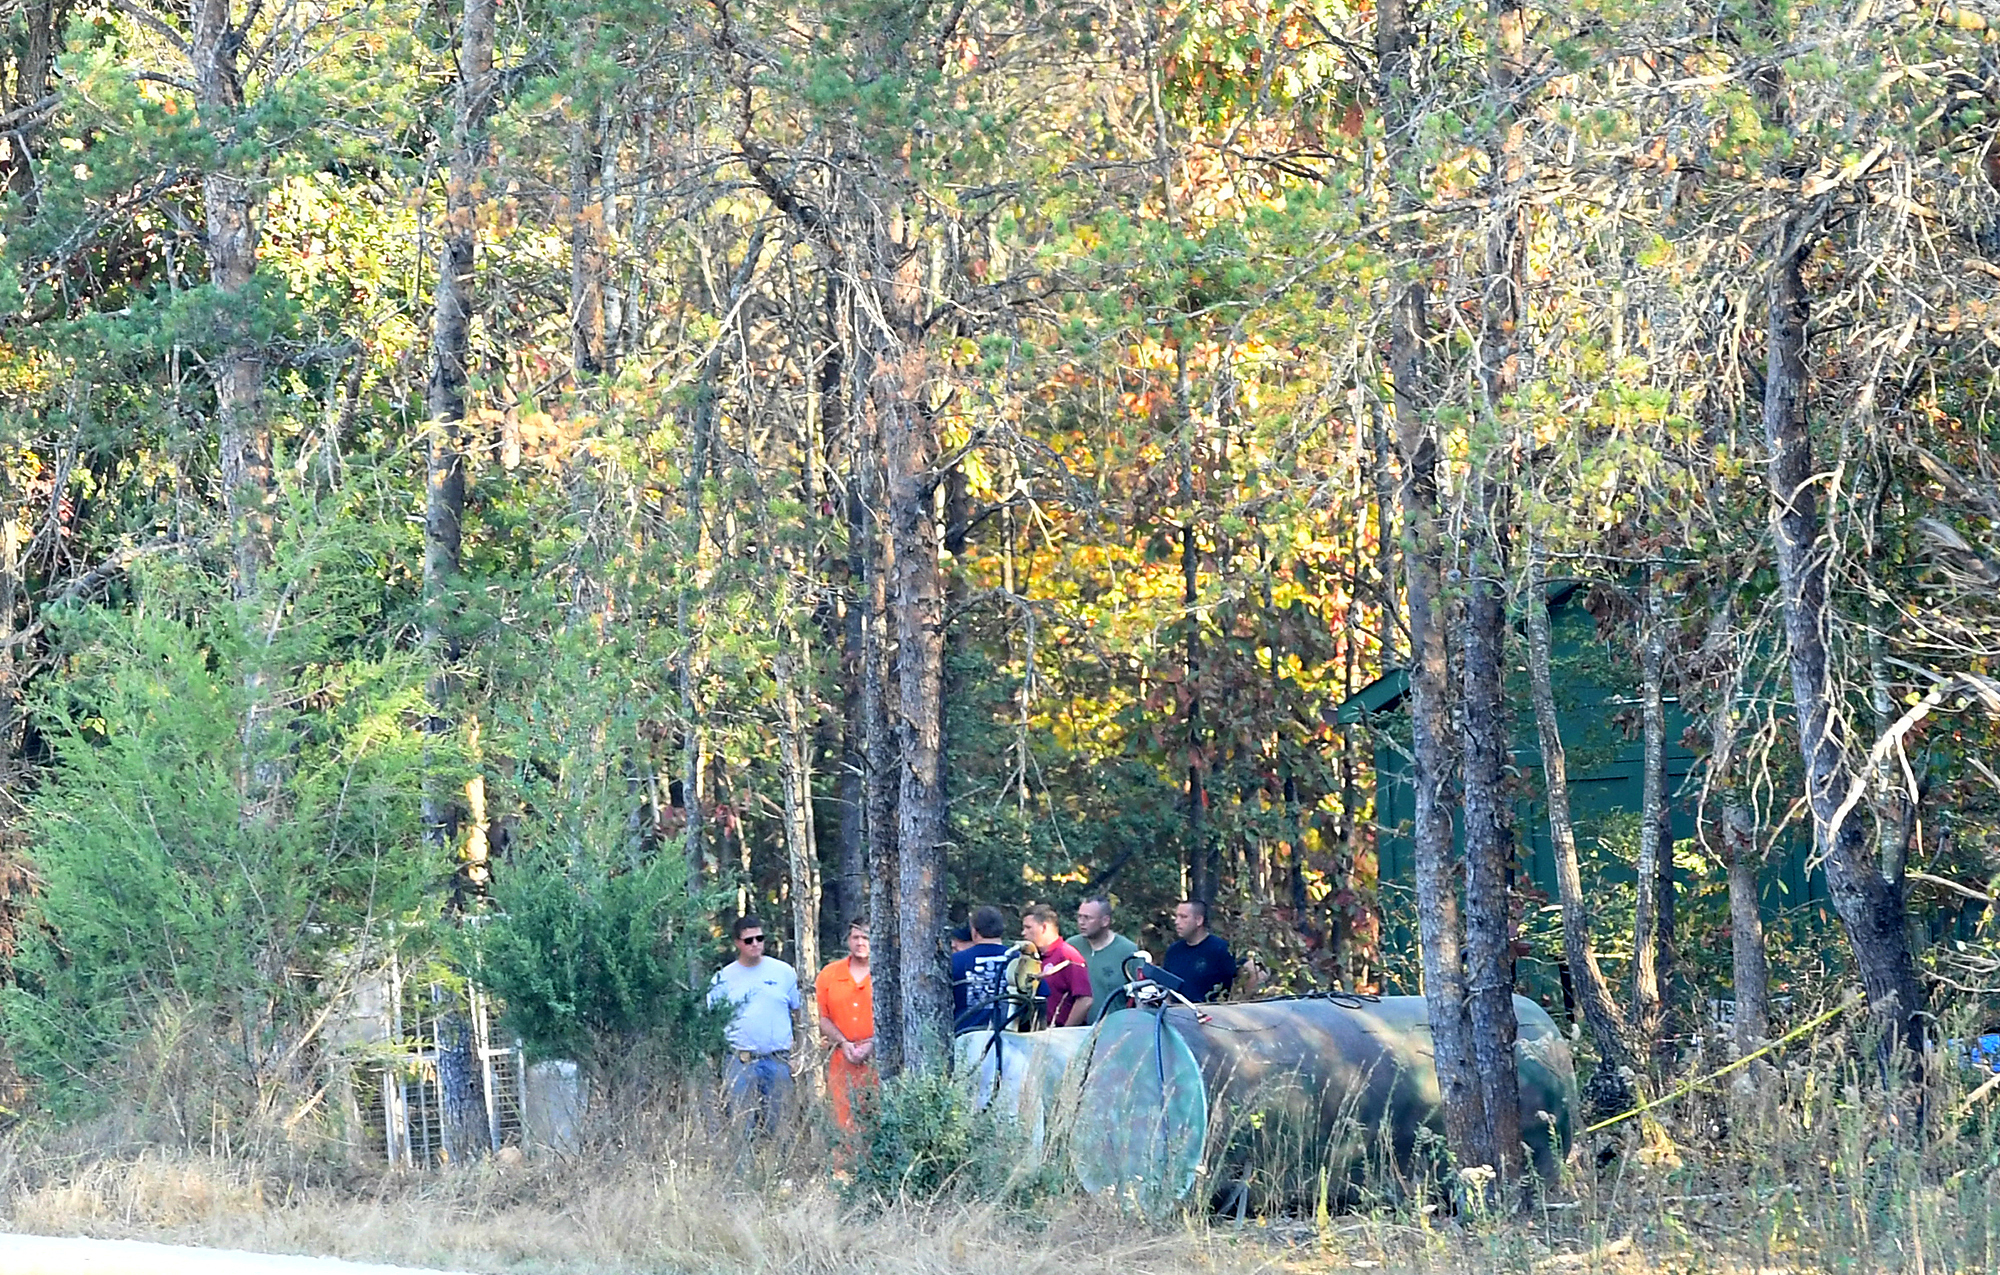  Todd Kohlhepp in handcuffs and an orange jumpsuit walks with deputies Saturday, November 5, 2016, on the property where a missing woman was found chained in a metal container in Woodruff. 